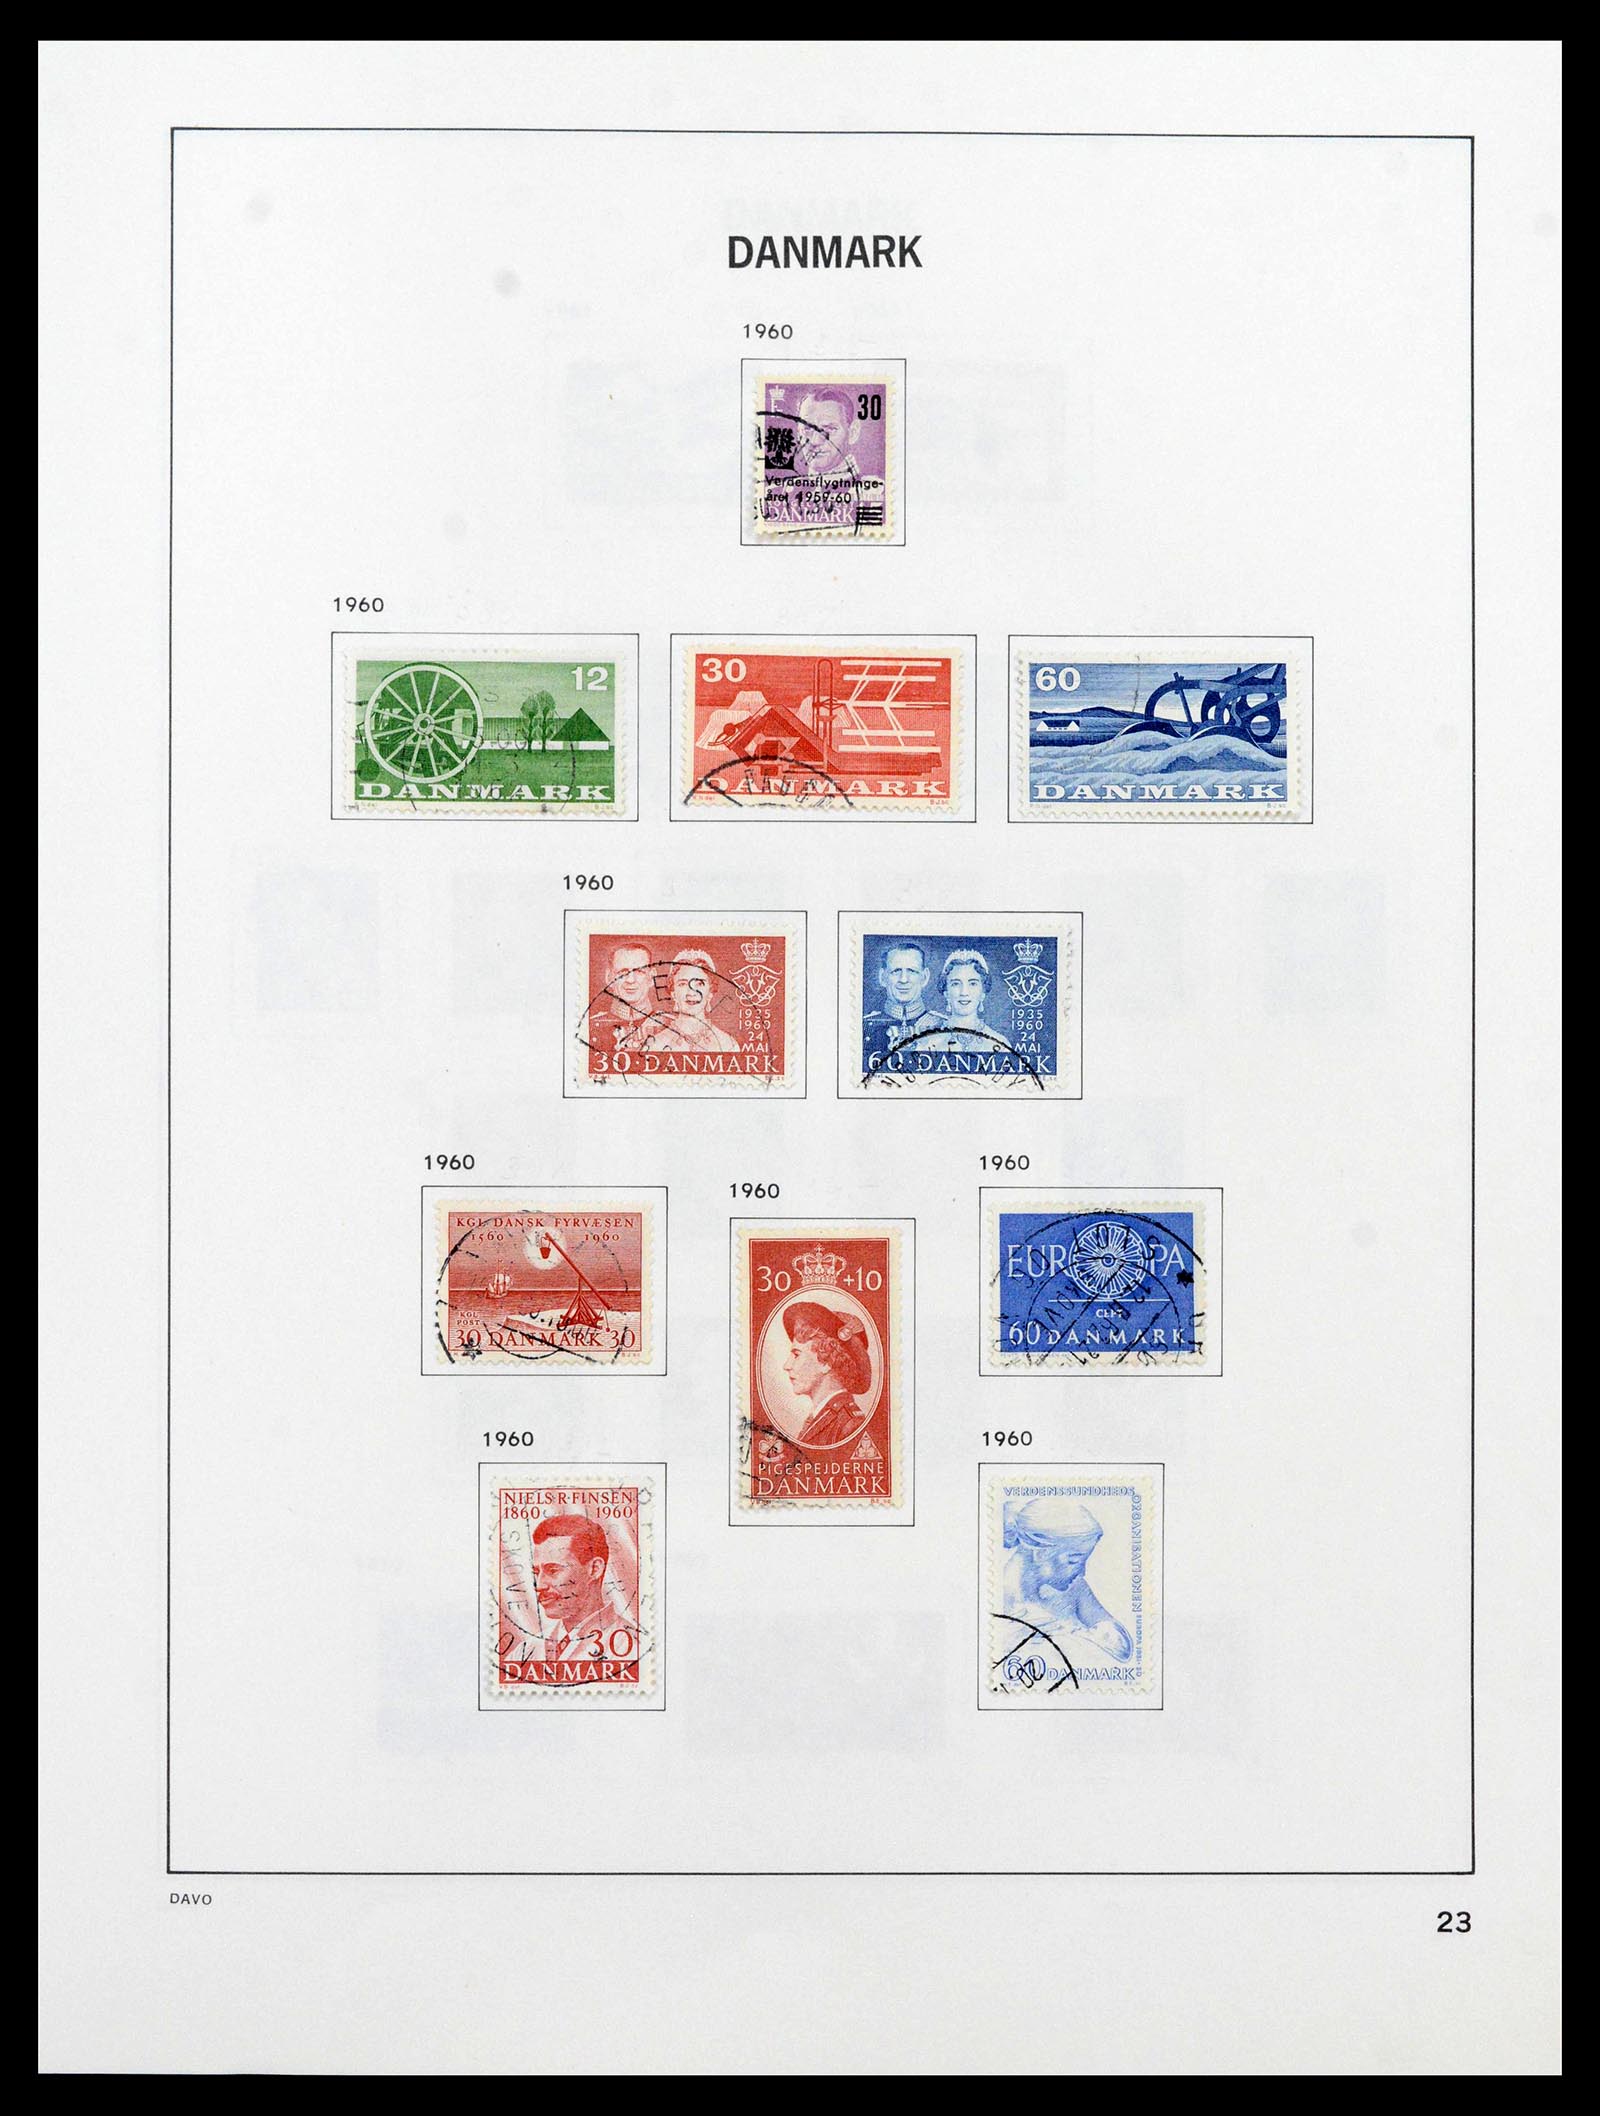 39428 0025 - Stamp collection 39428 Denmark 1851-2019.